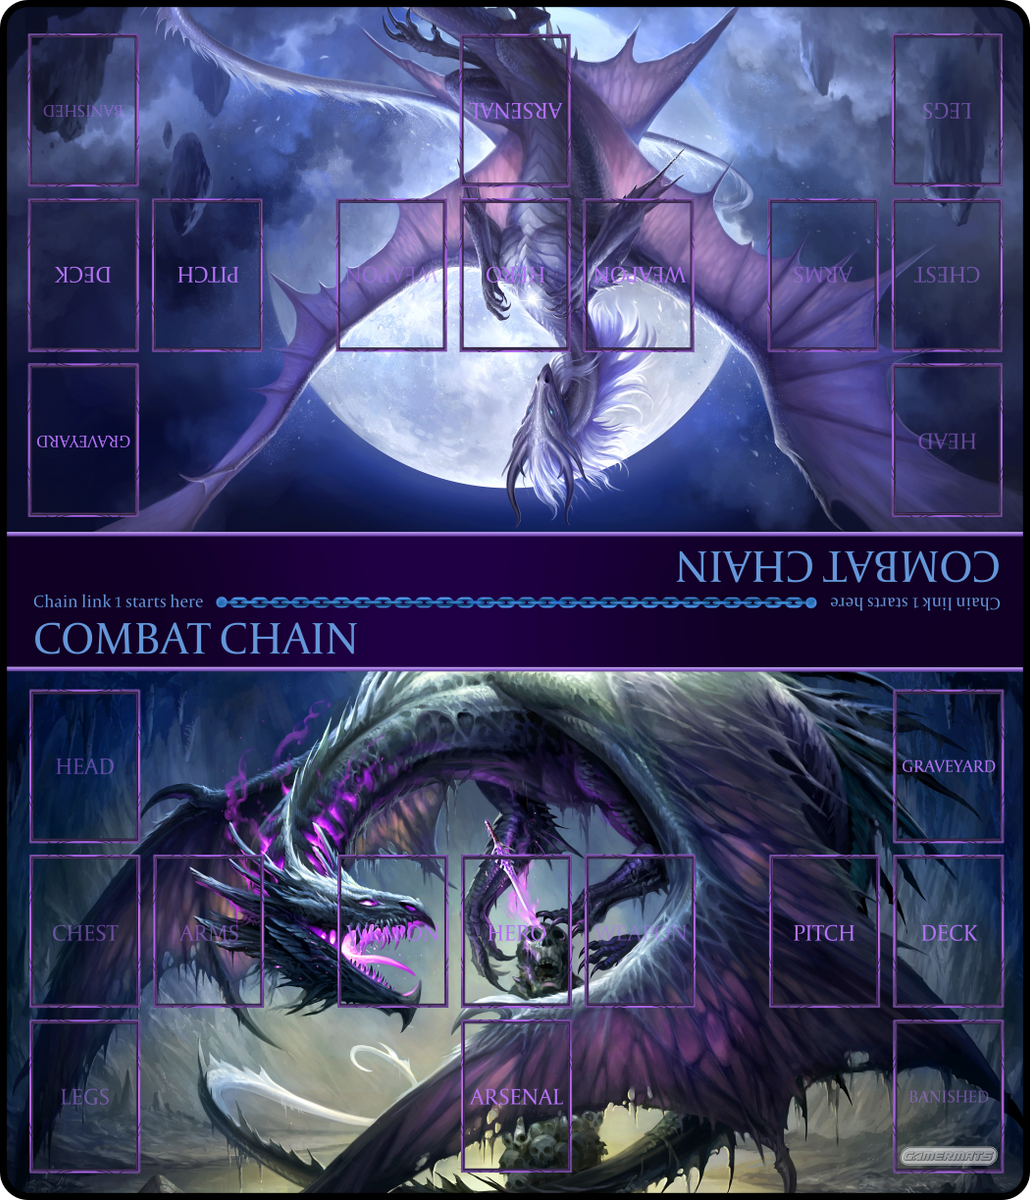  The Gaming Mat Company 2 Player Flesh and Blood TCG Playmat-  Deluxe 28.3 x 28.3 x 0.16 Compatible with Flesh & Blood TCG Cards -  Flesh and Blood Playmat with Zones